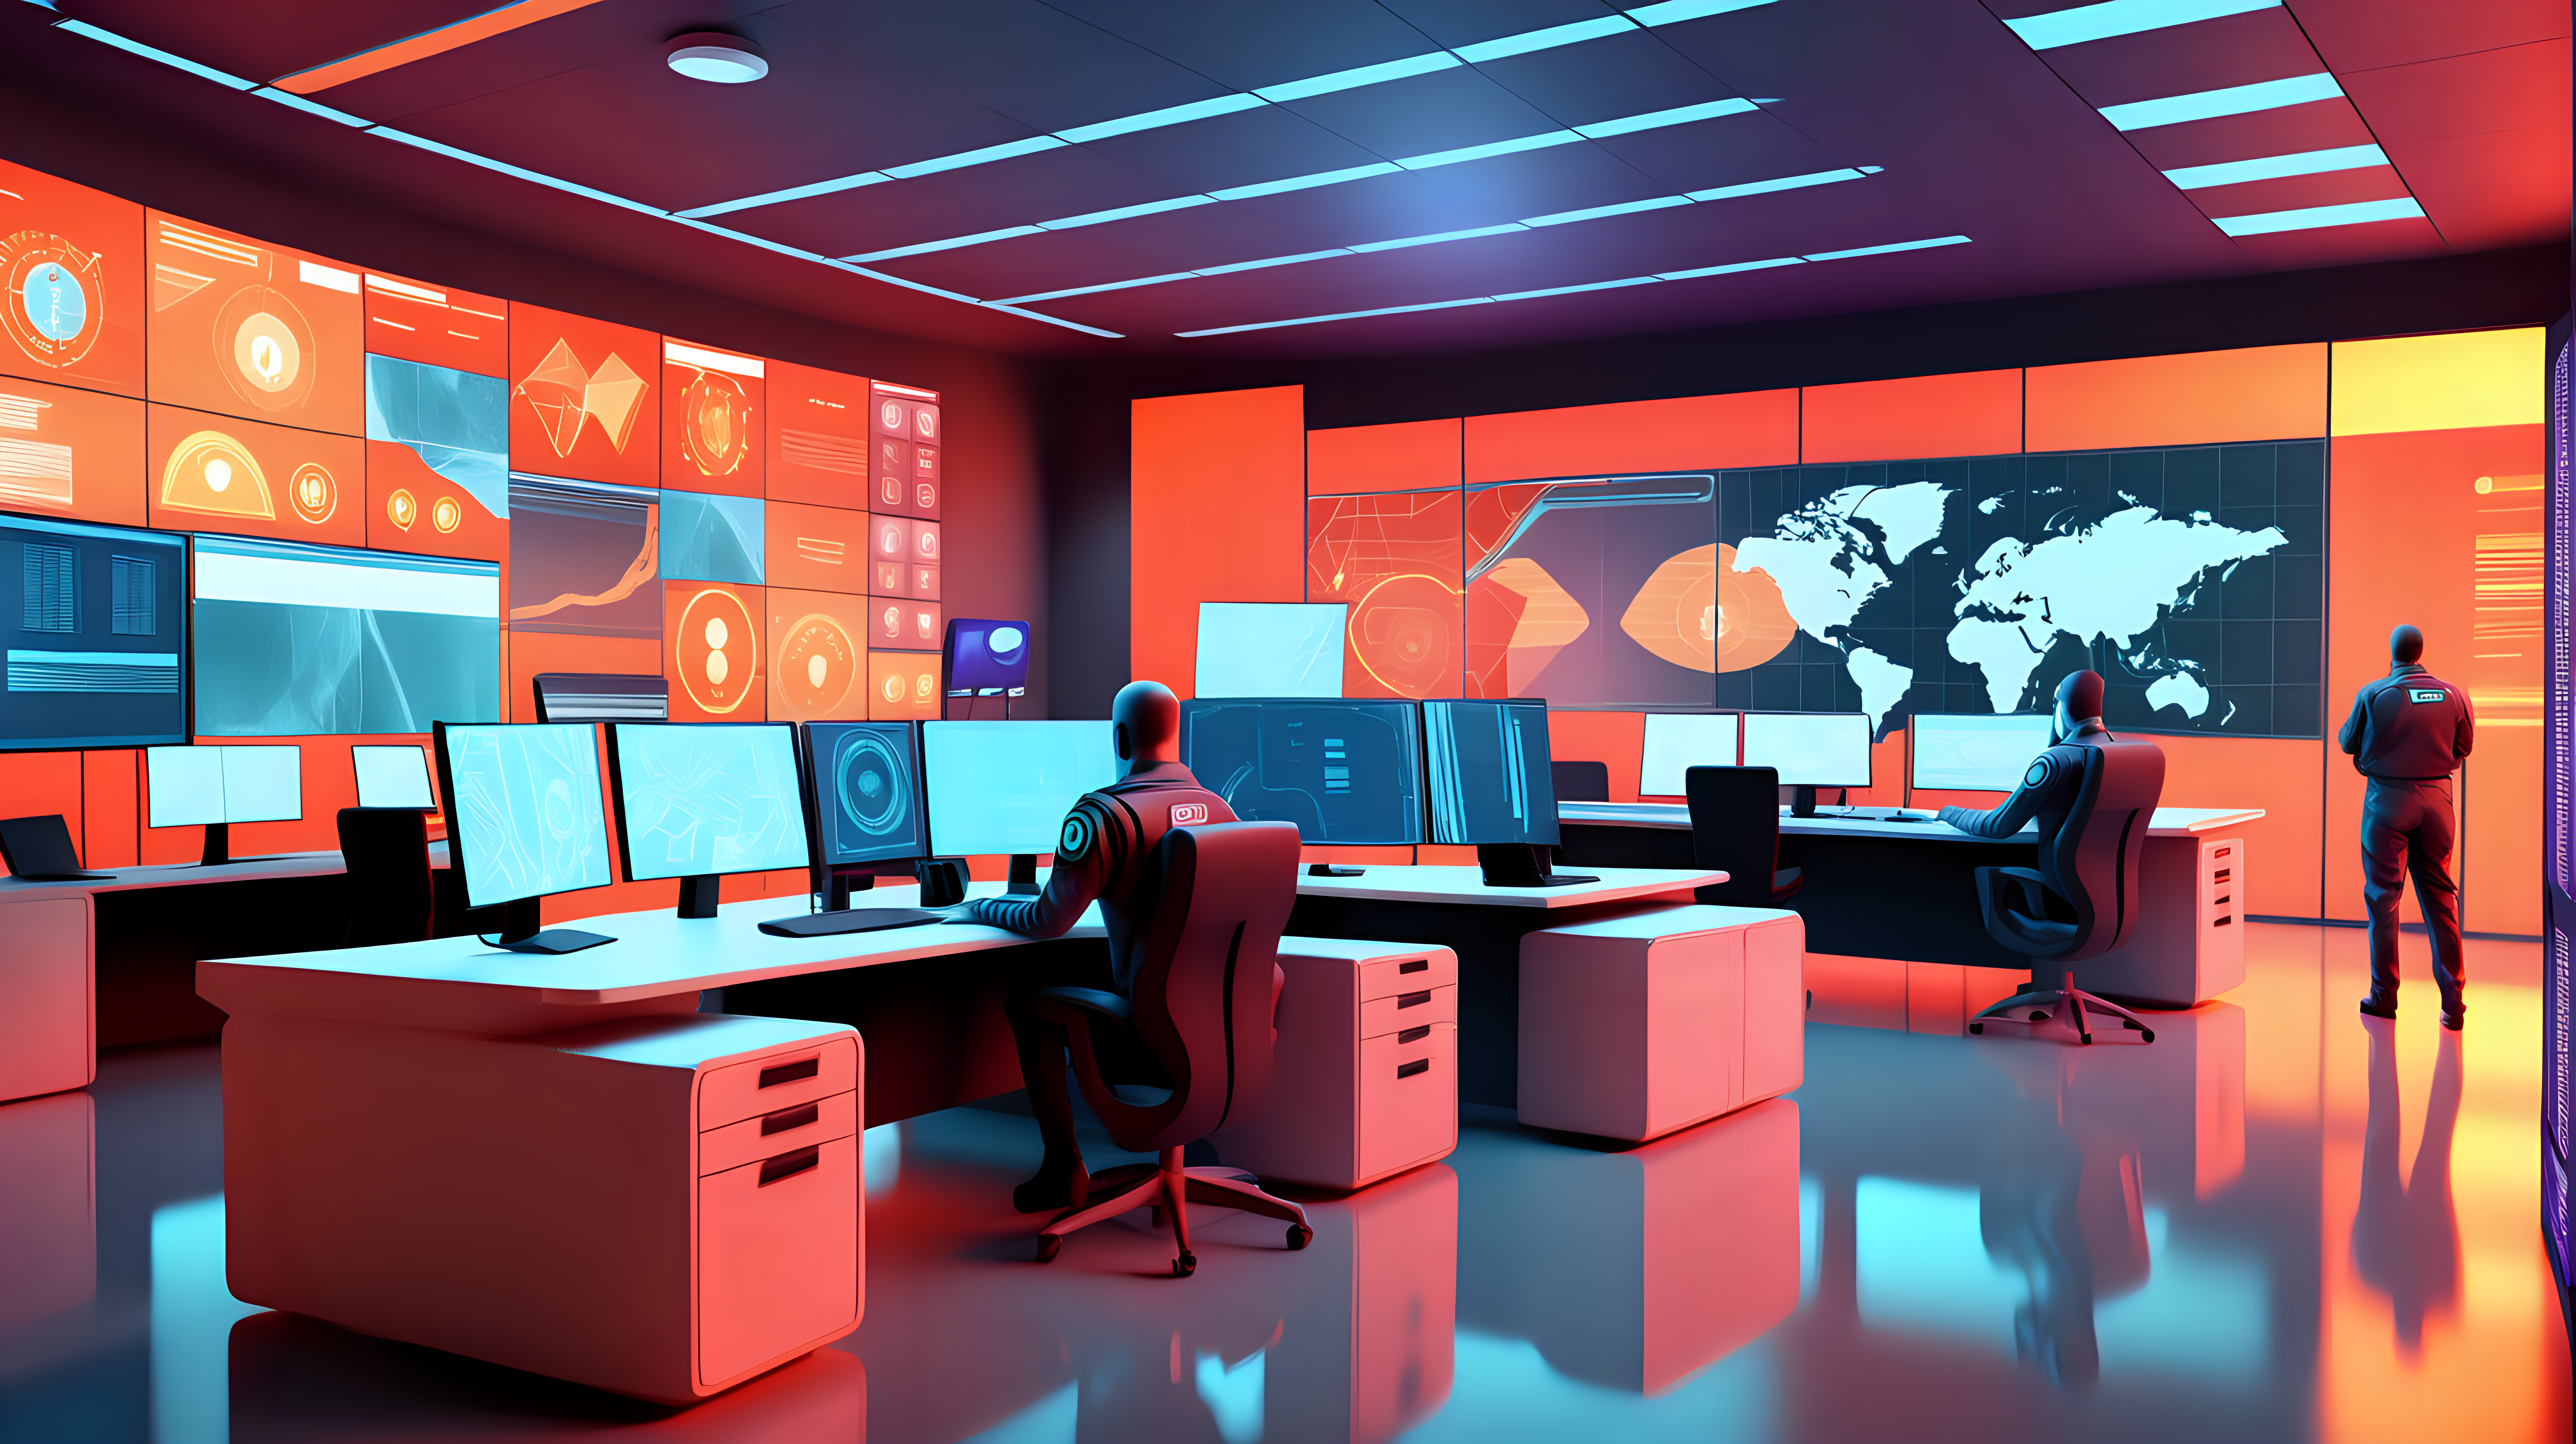 security operations center from the future with vivid warm colors